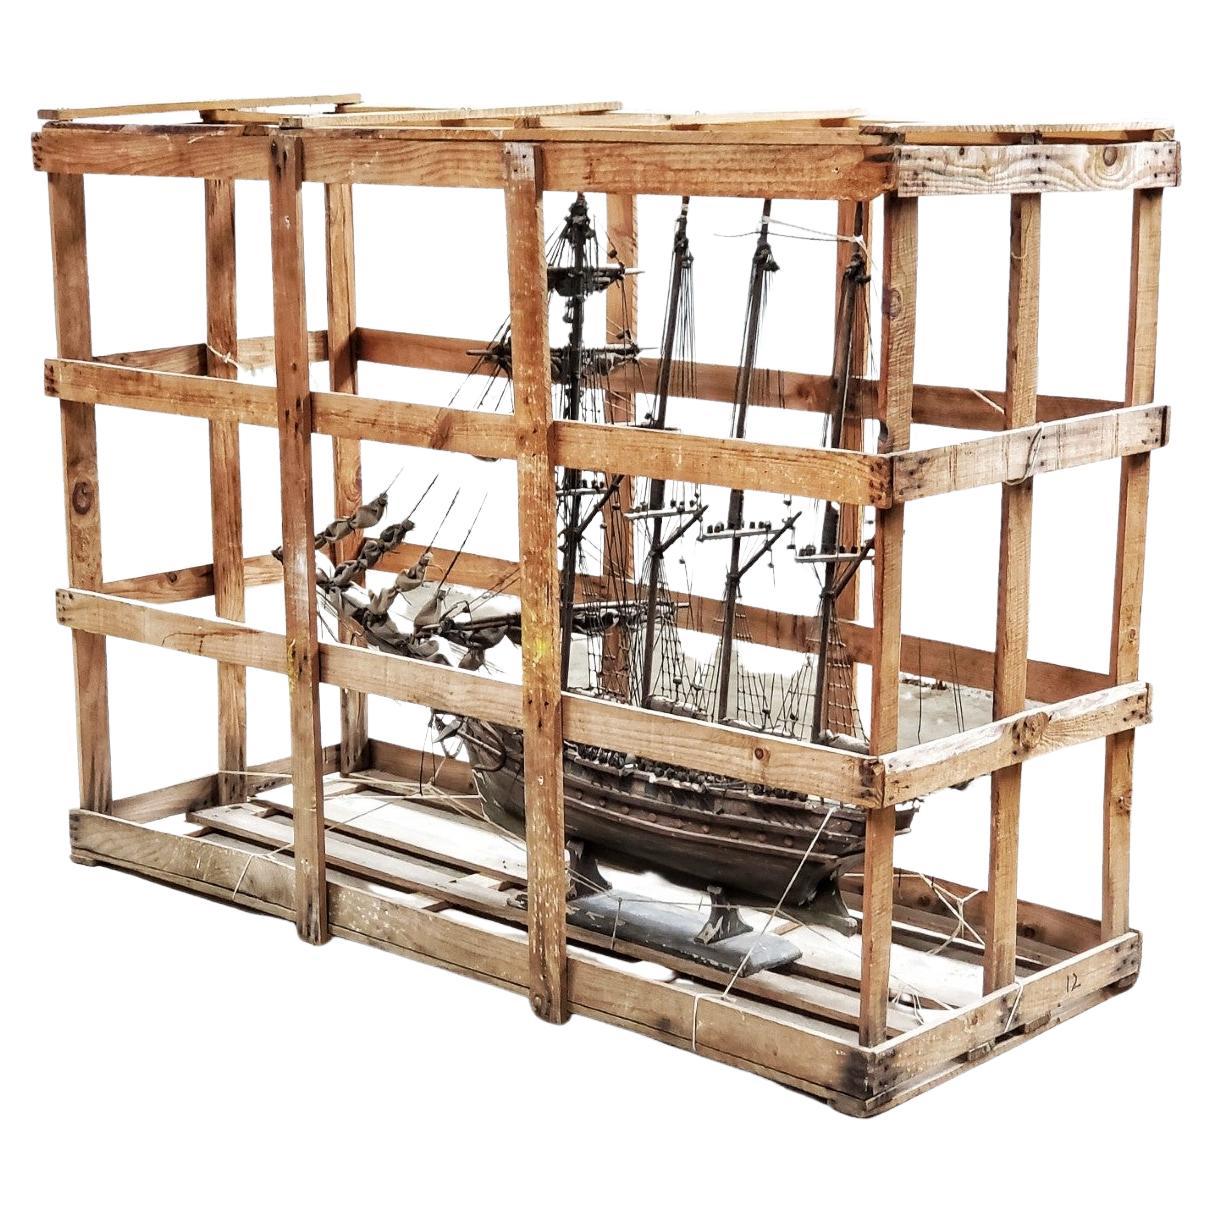 Late 19th Century Ship's Model in Crate art object For Sale